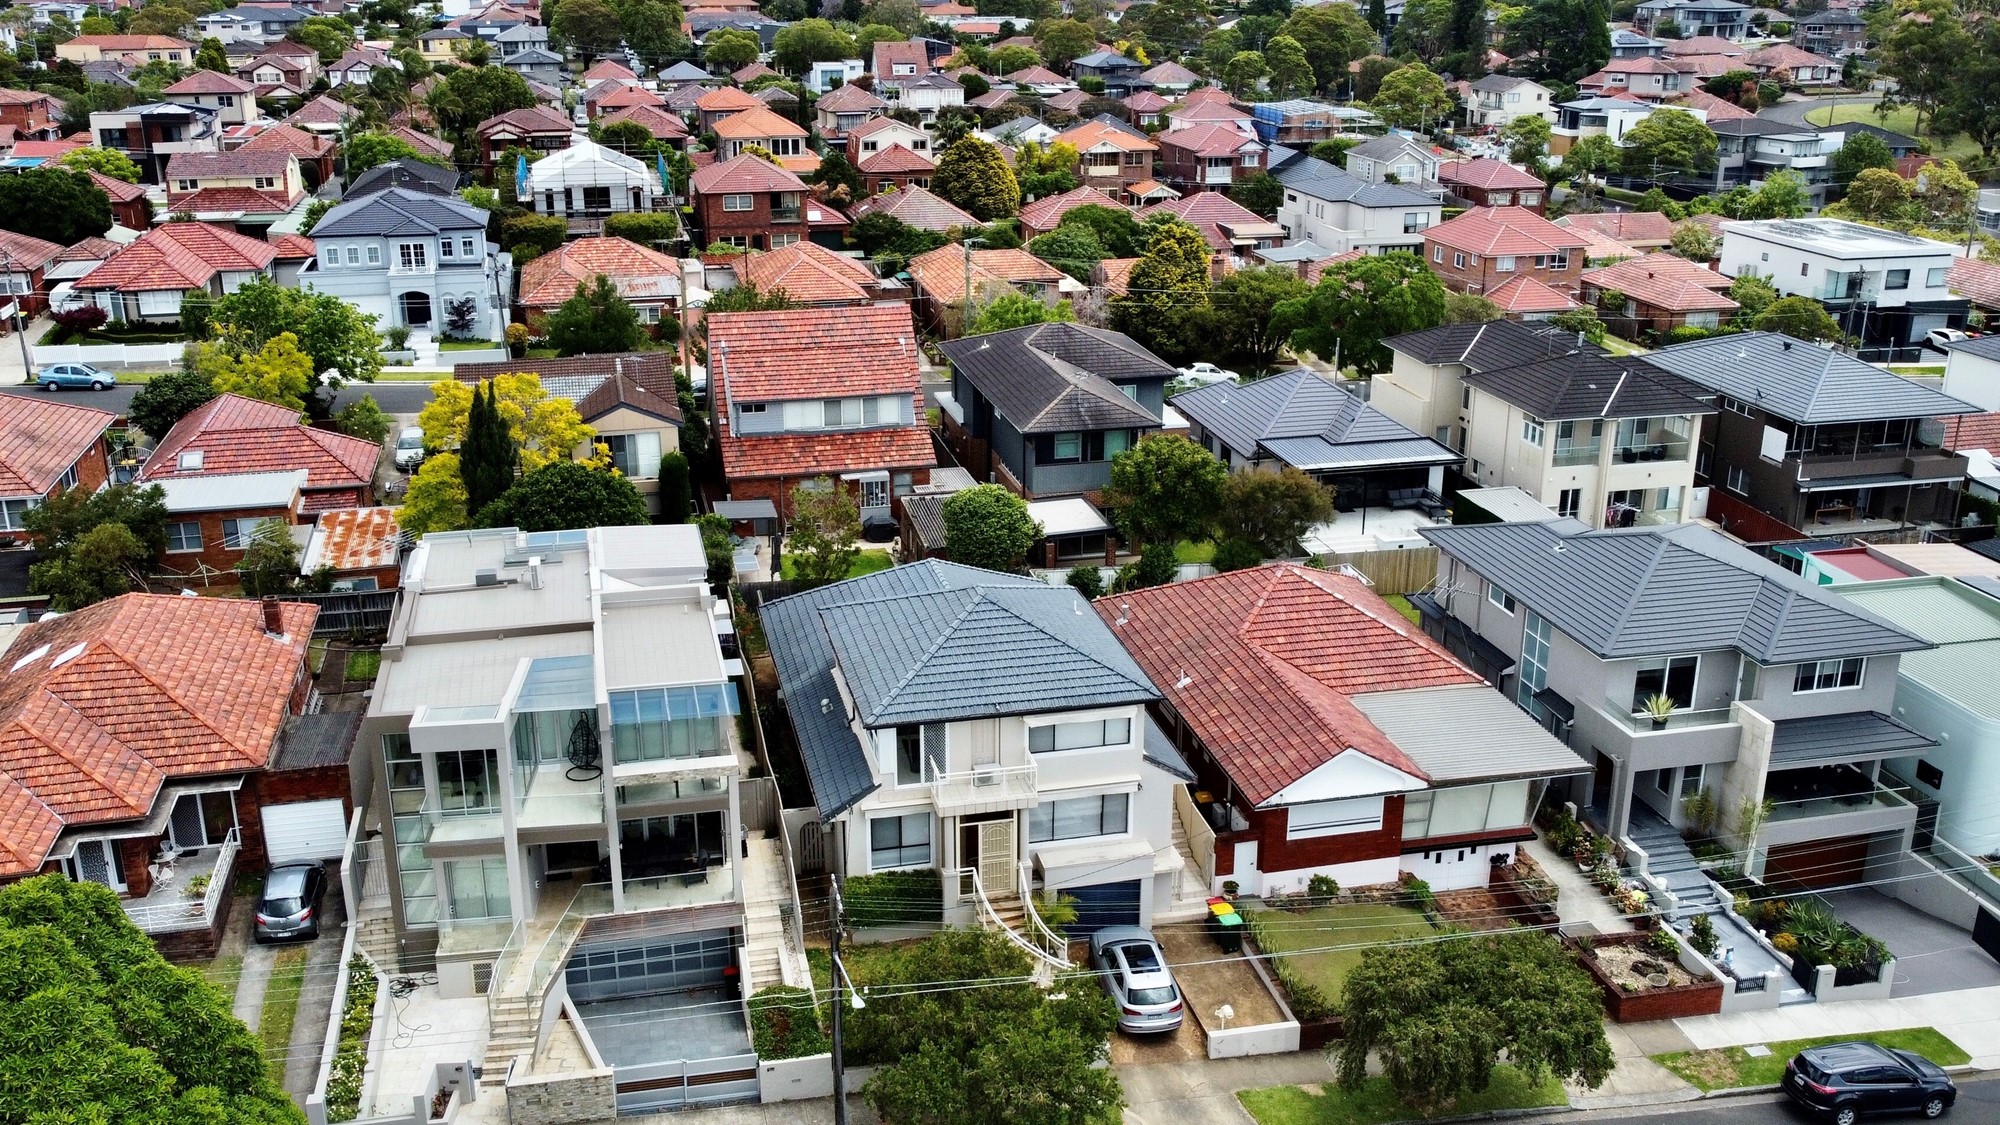 Australian housing market was in declince this year.